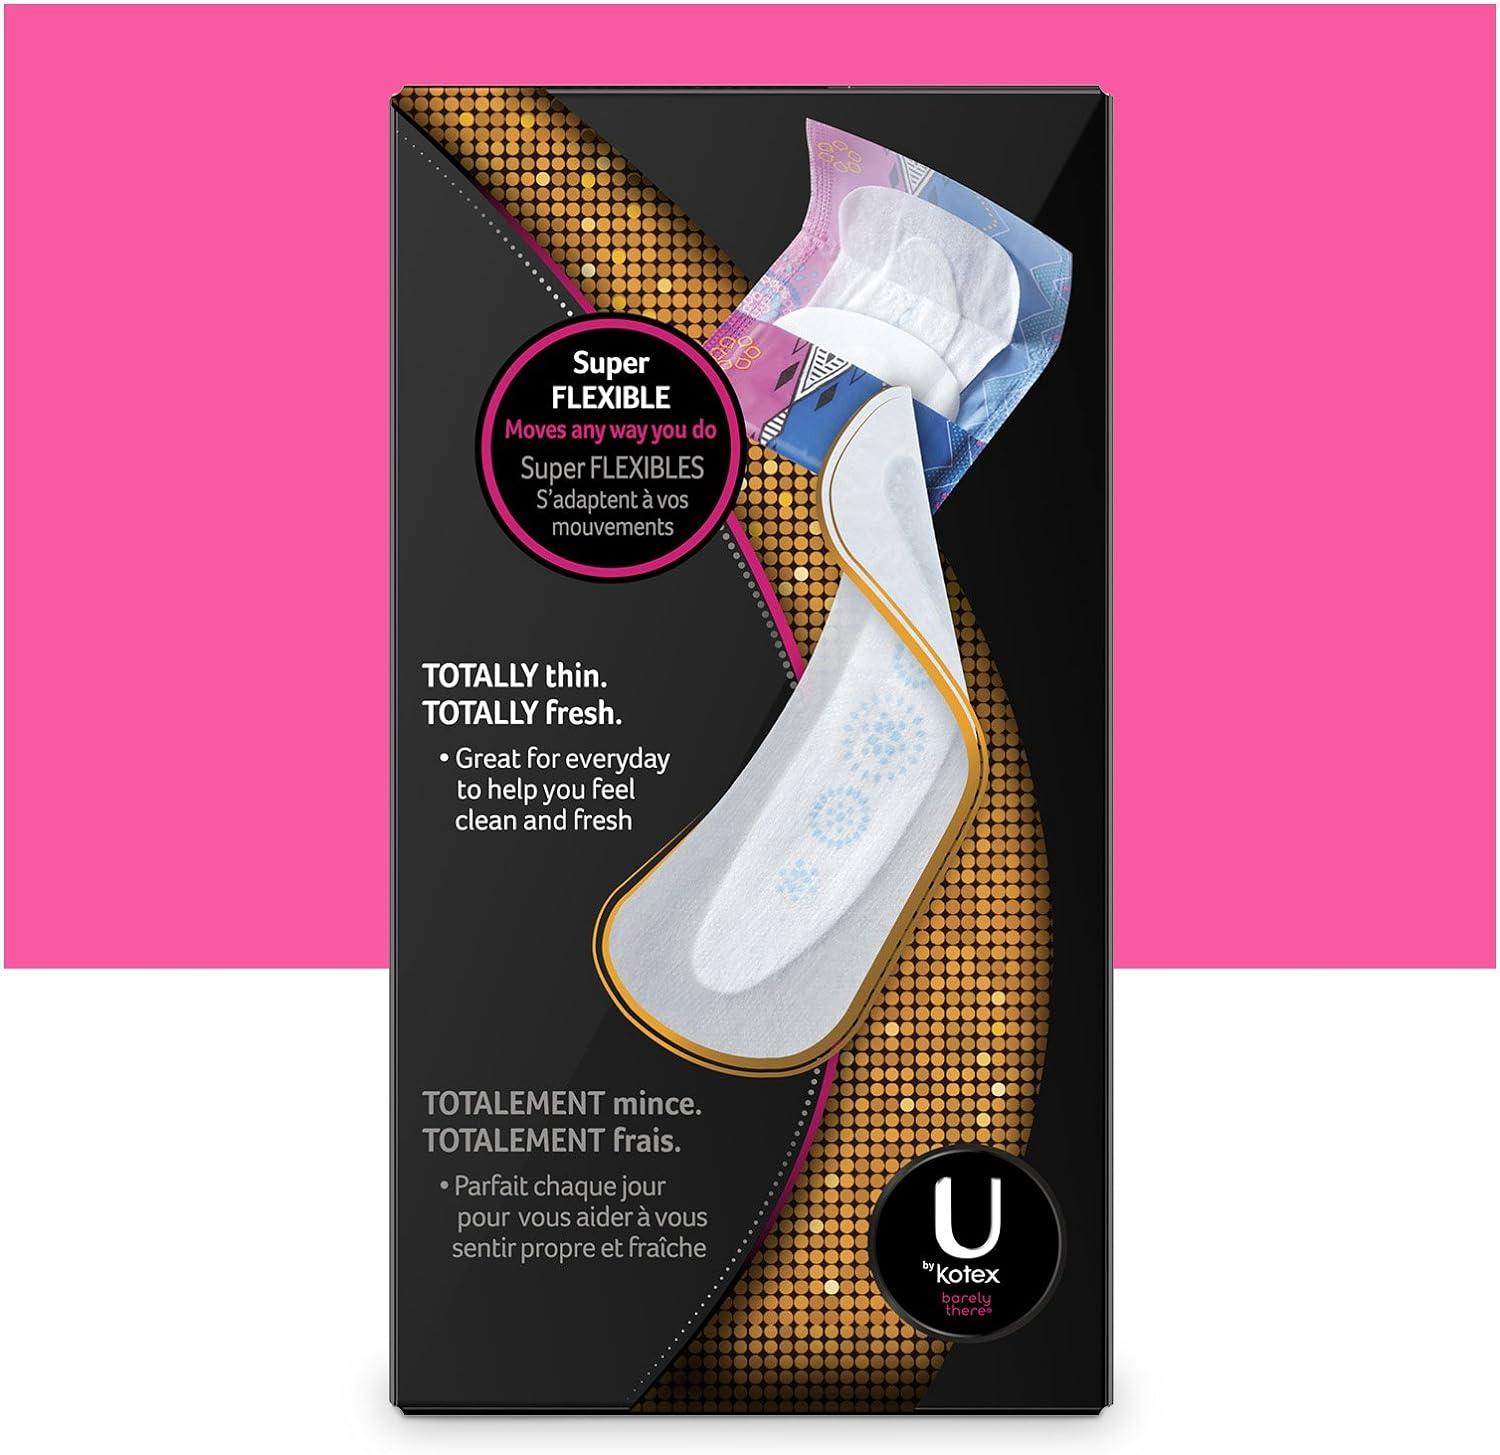 U by Kotex Barely There Liners, Light Absorbency, Regular